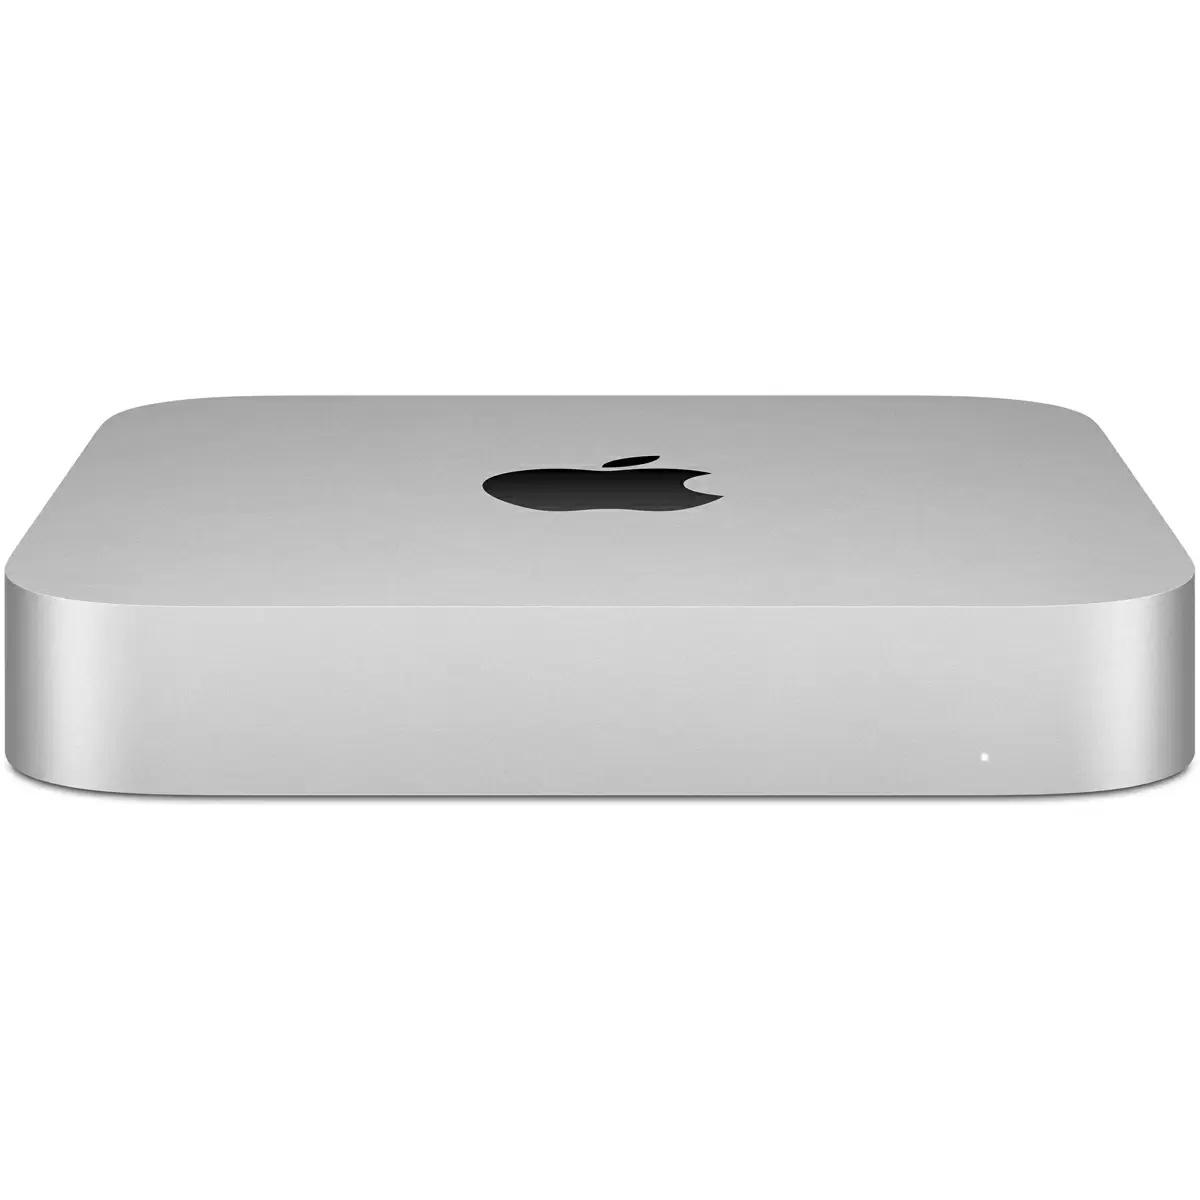 Apple Mac Mini M1 Chip 512GB Device Computer for $799.99 Shipped